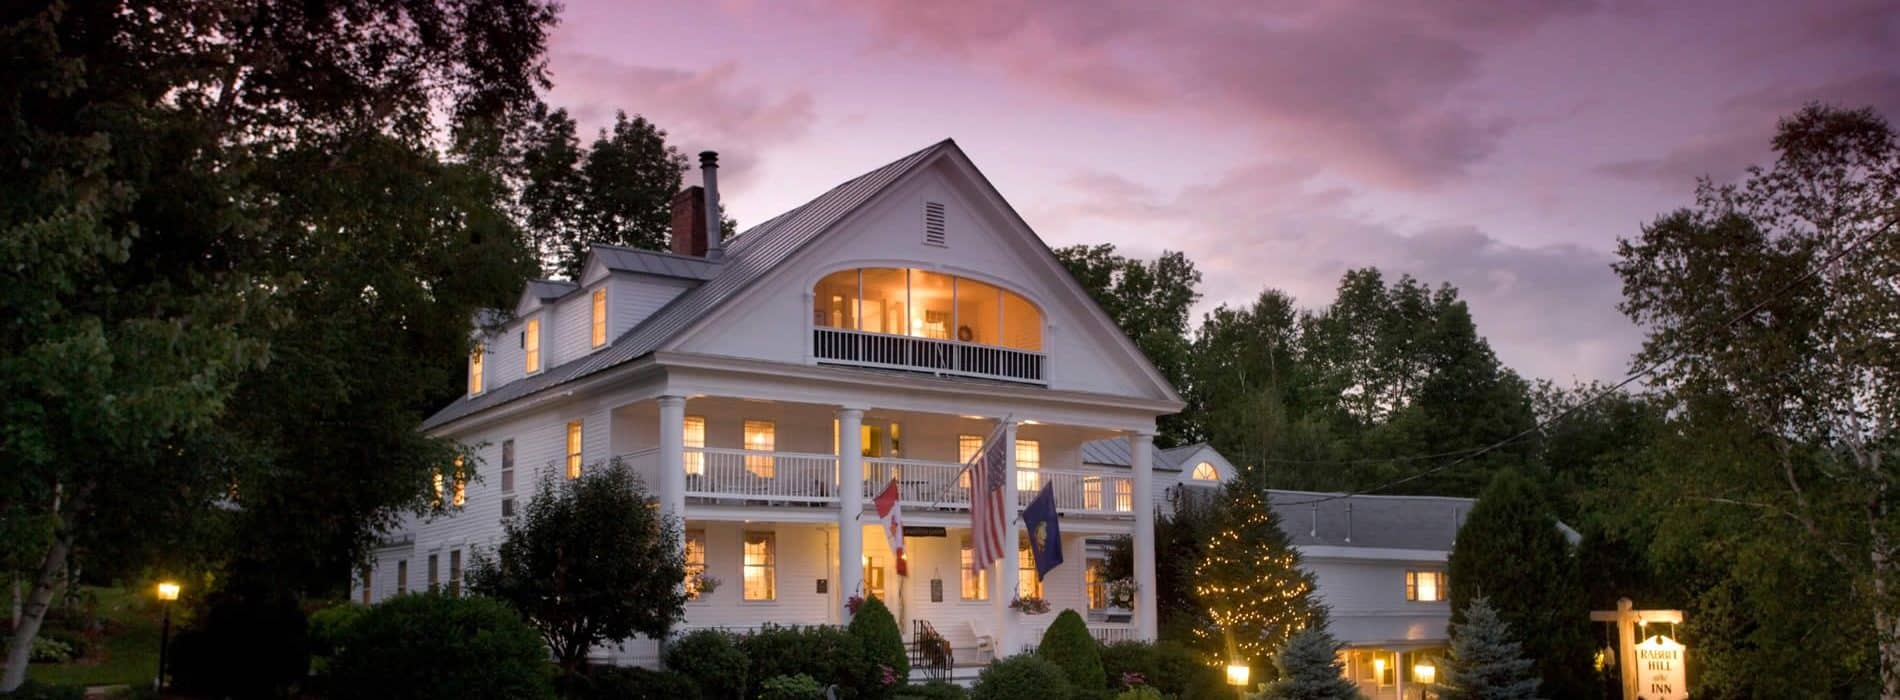 rabbit Hill inn at dusk under a purple sky|woman on cover of travel magazine